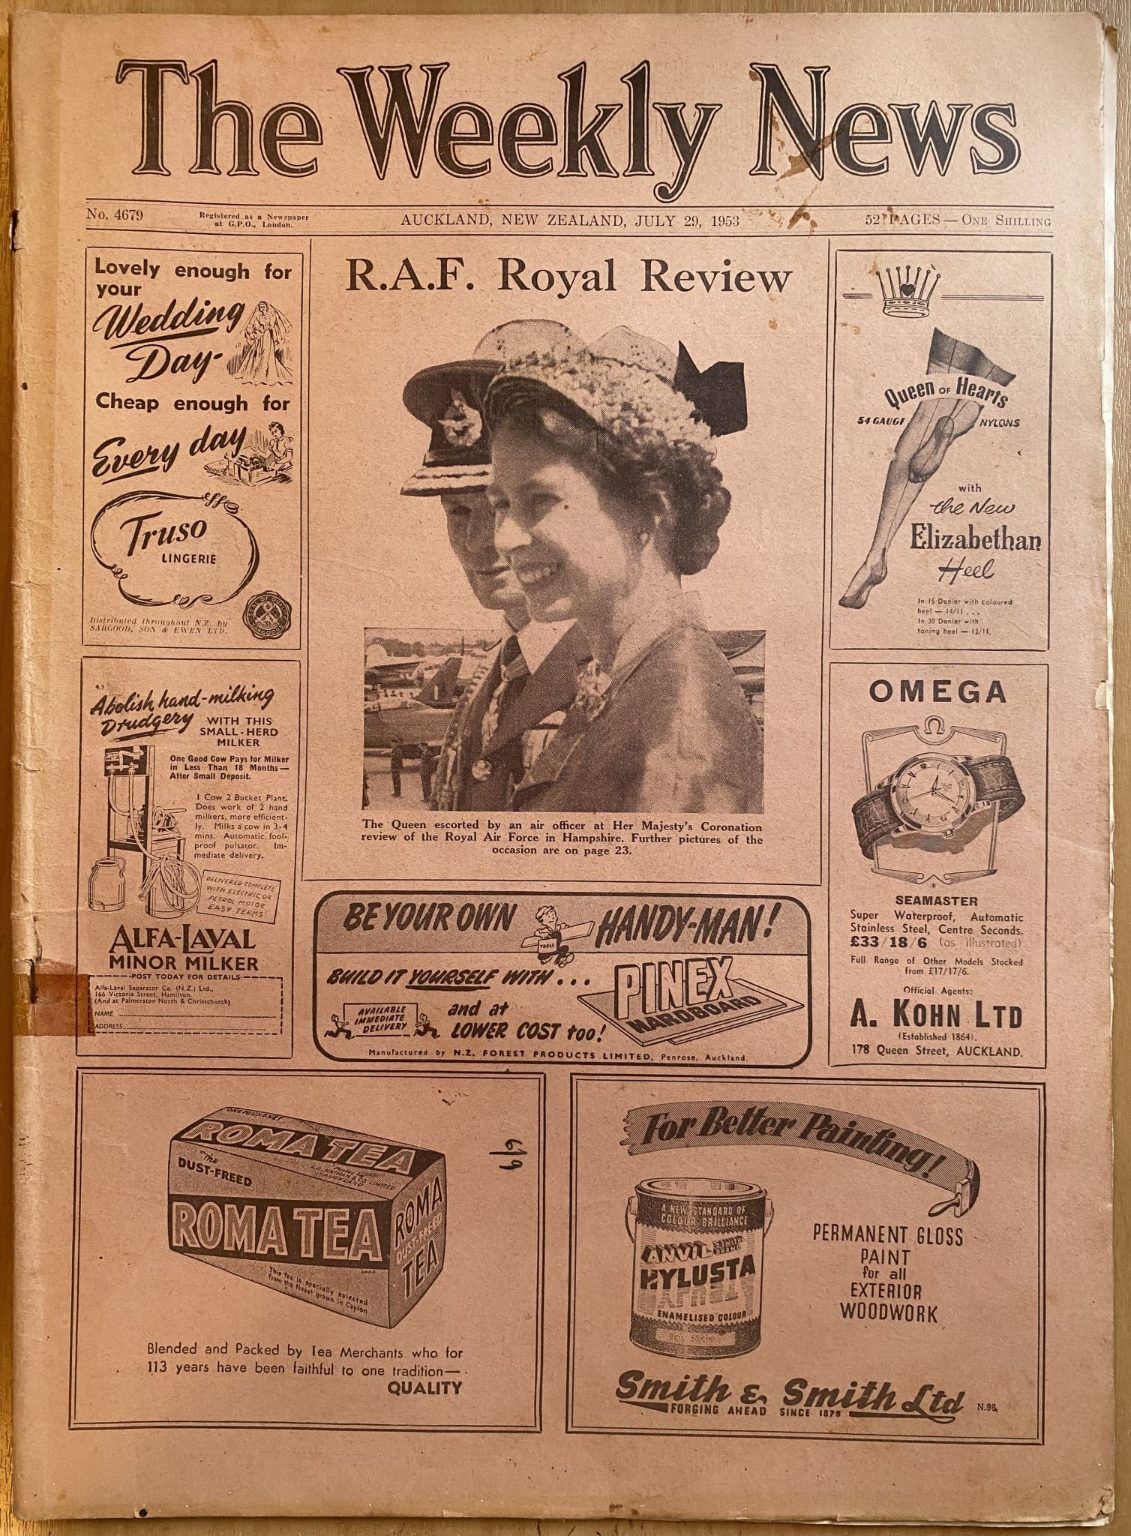 OLD NEWSPAPER: The Weekly News - No. 4679, 29 July 1953